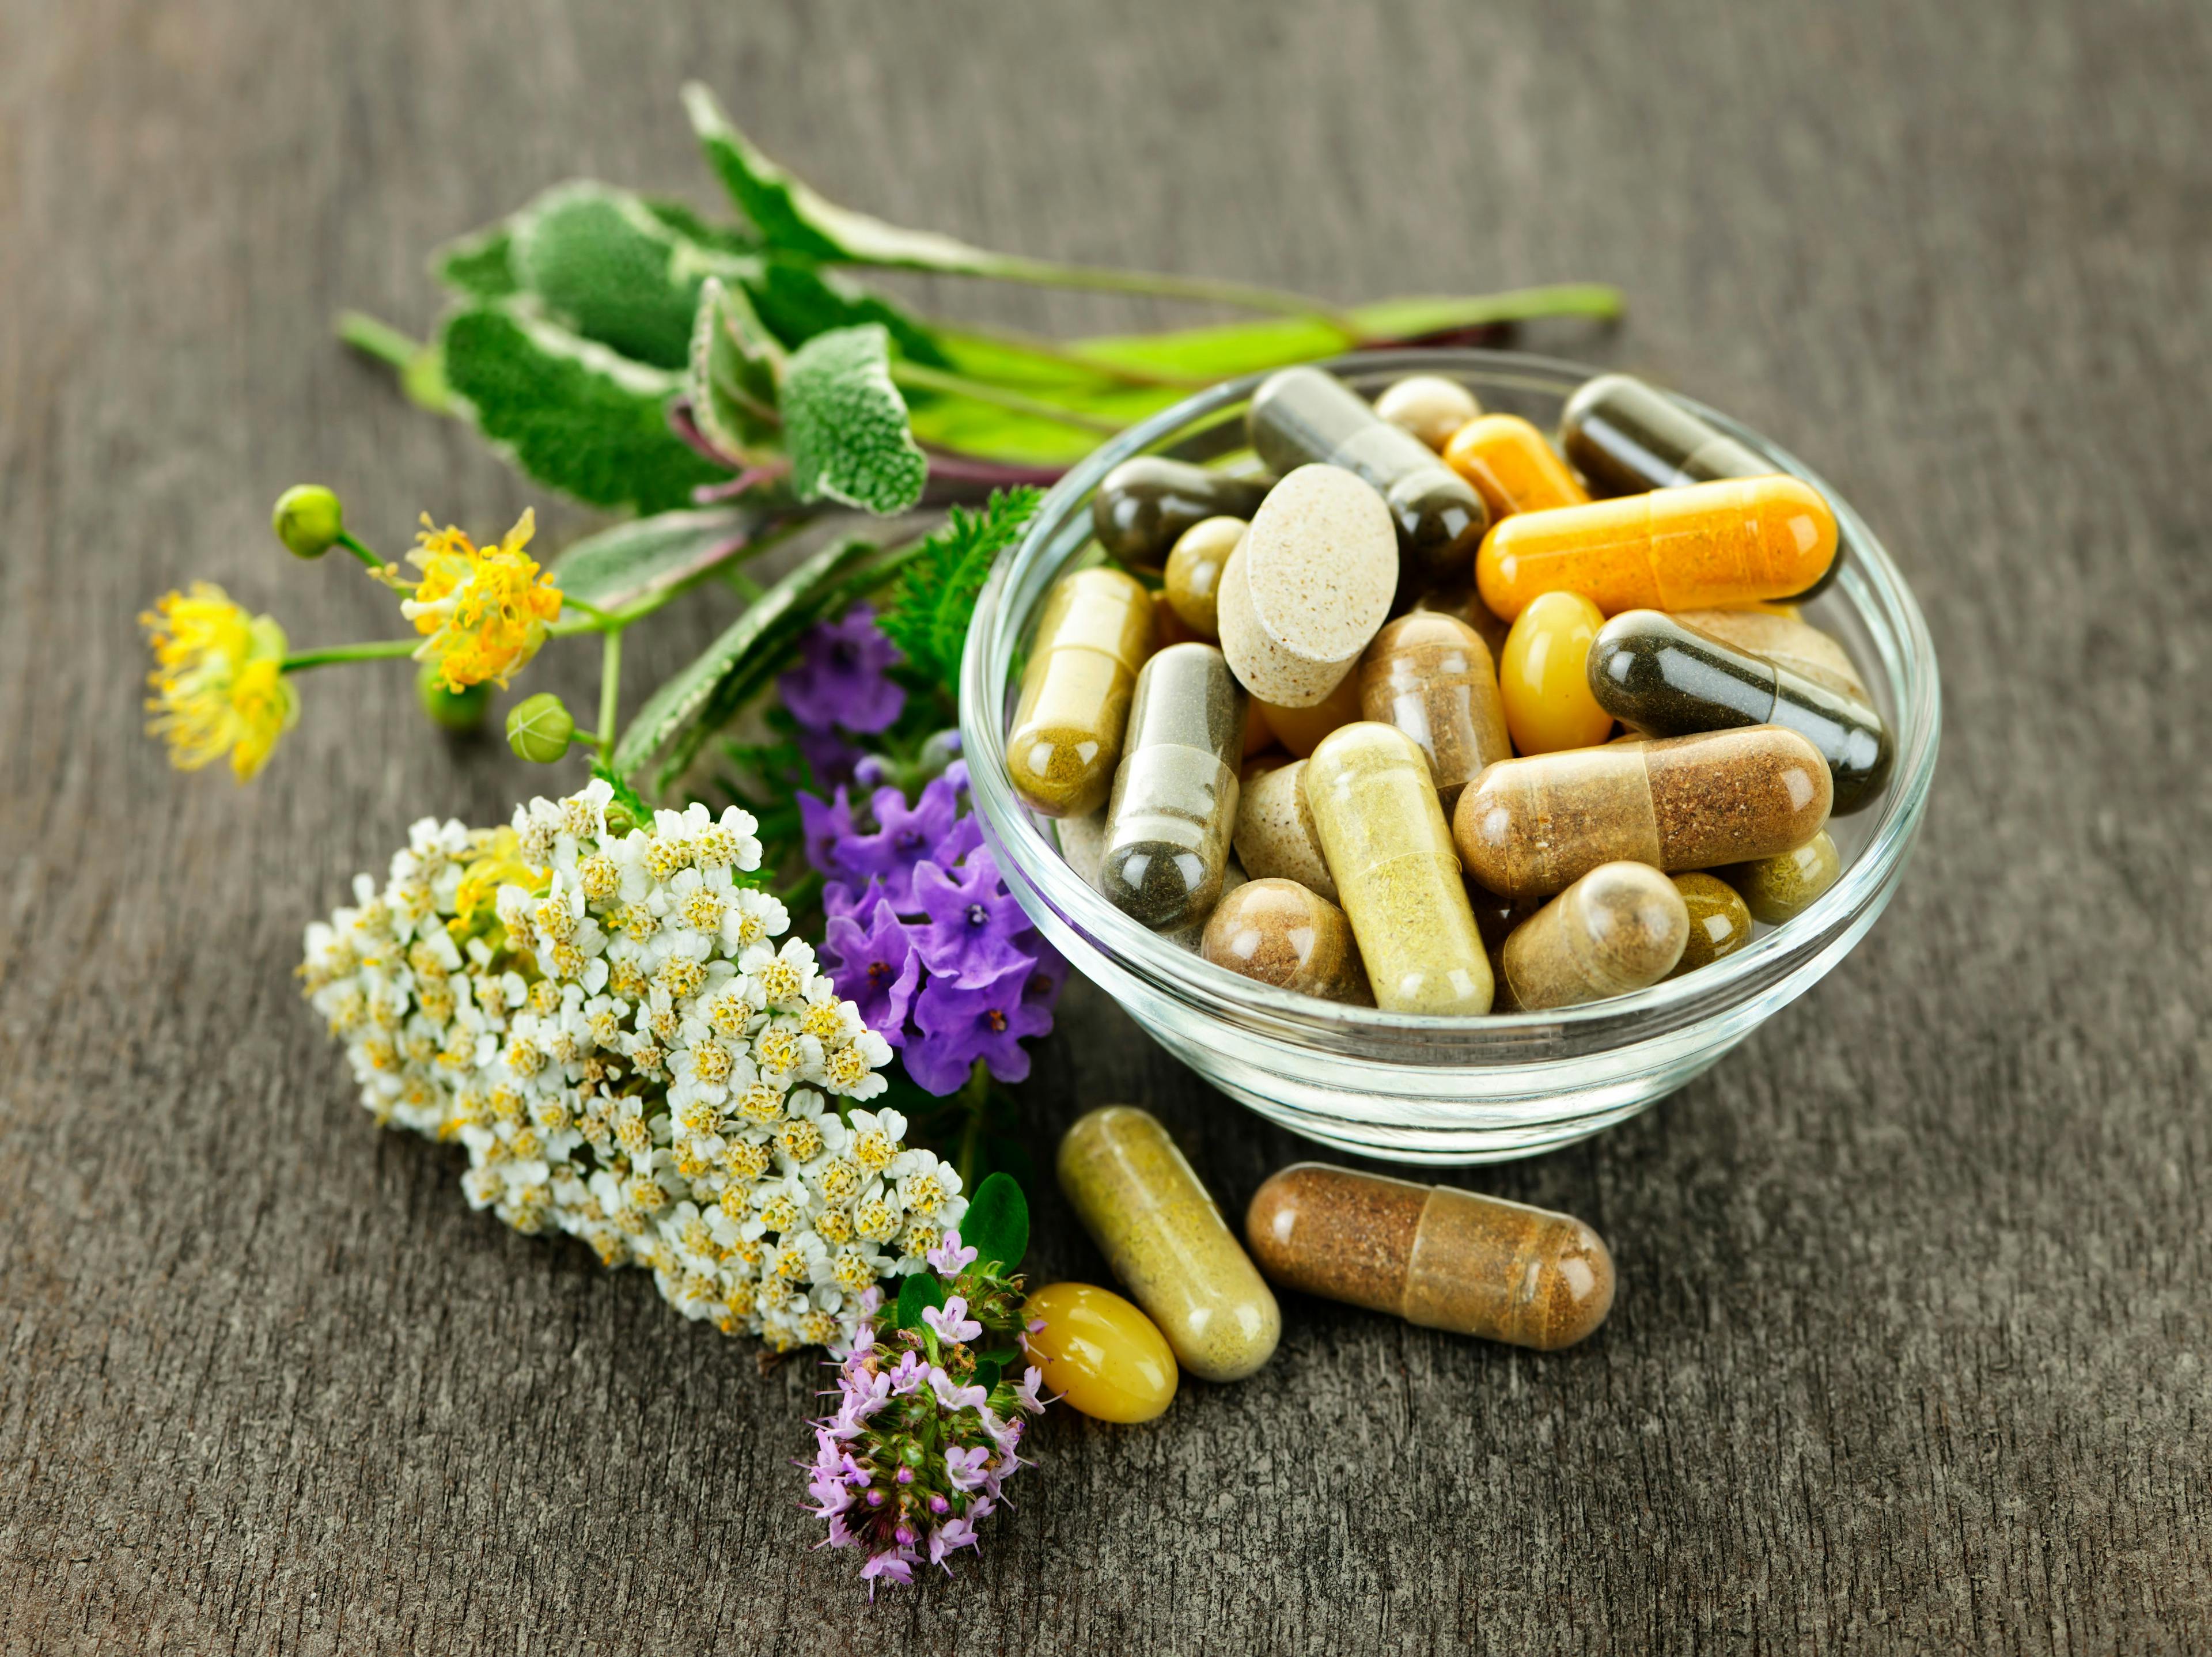 Growing Use of Herbal Medicine in Cancer Patients Highlights Risks, Communication Gaps 